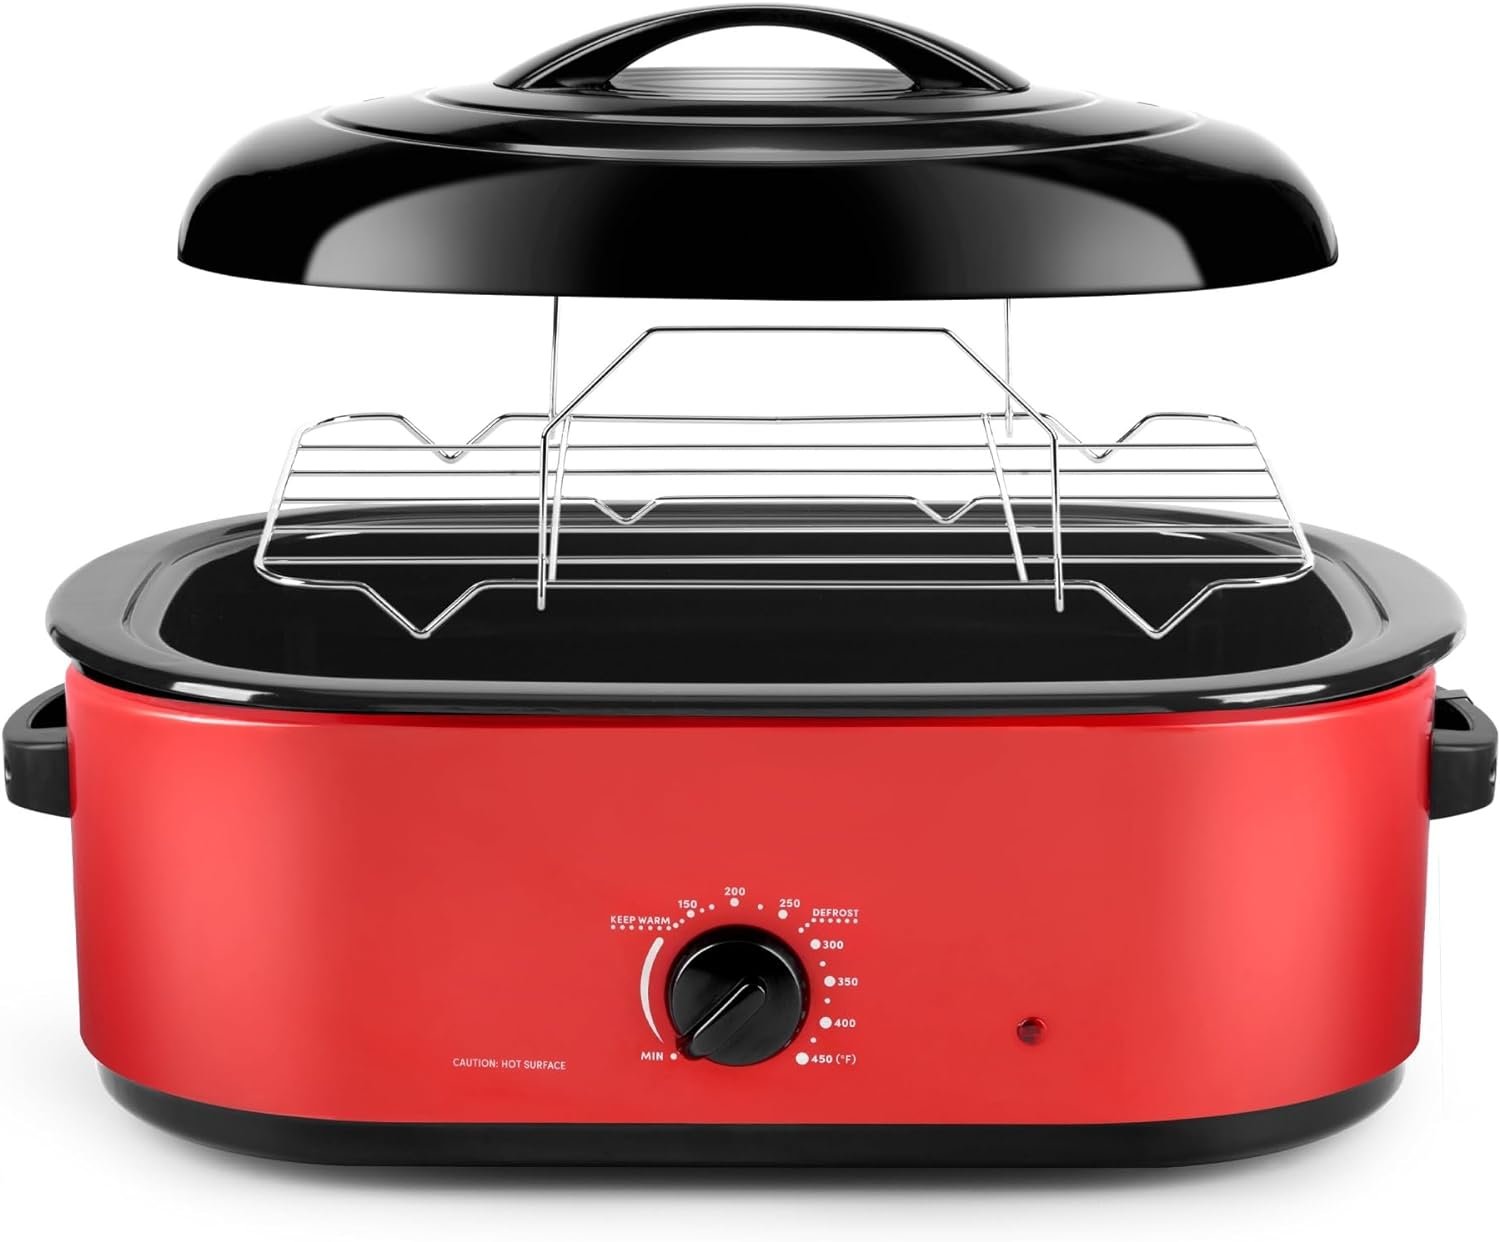 18Qt. Electric Roaster Oven with Metal Inner Rack - Red